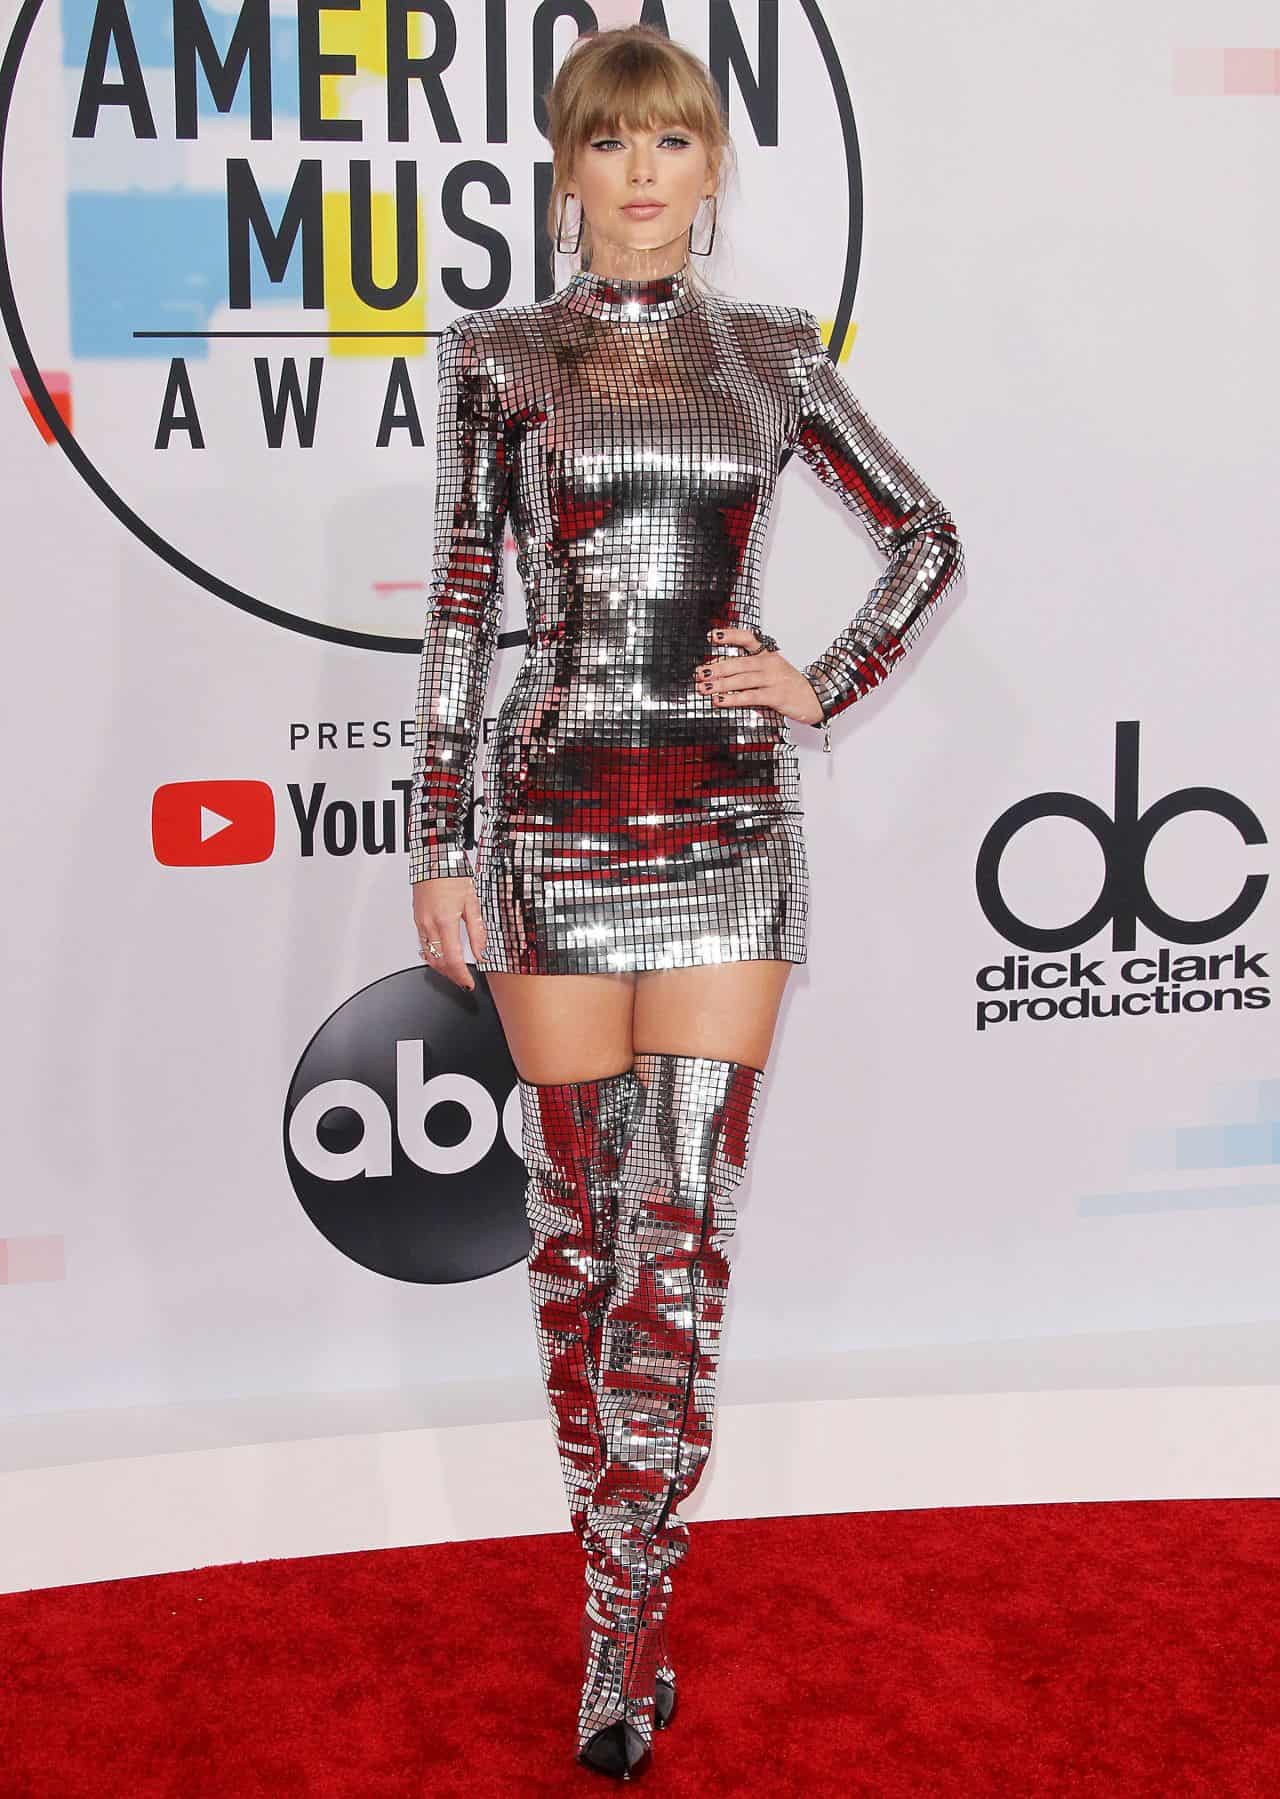 Taylor Swift Shines in Silver Mini Dress and Thigh-High Boots at AMAs